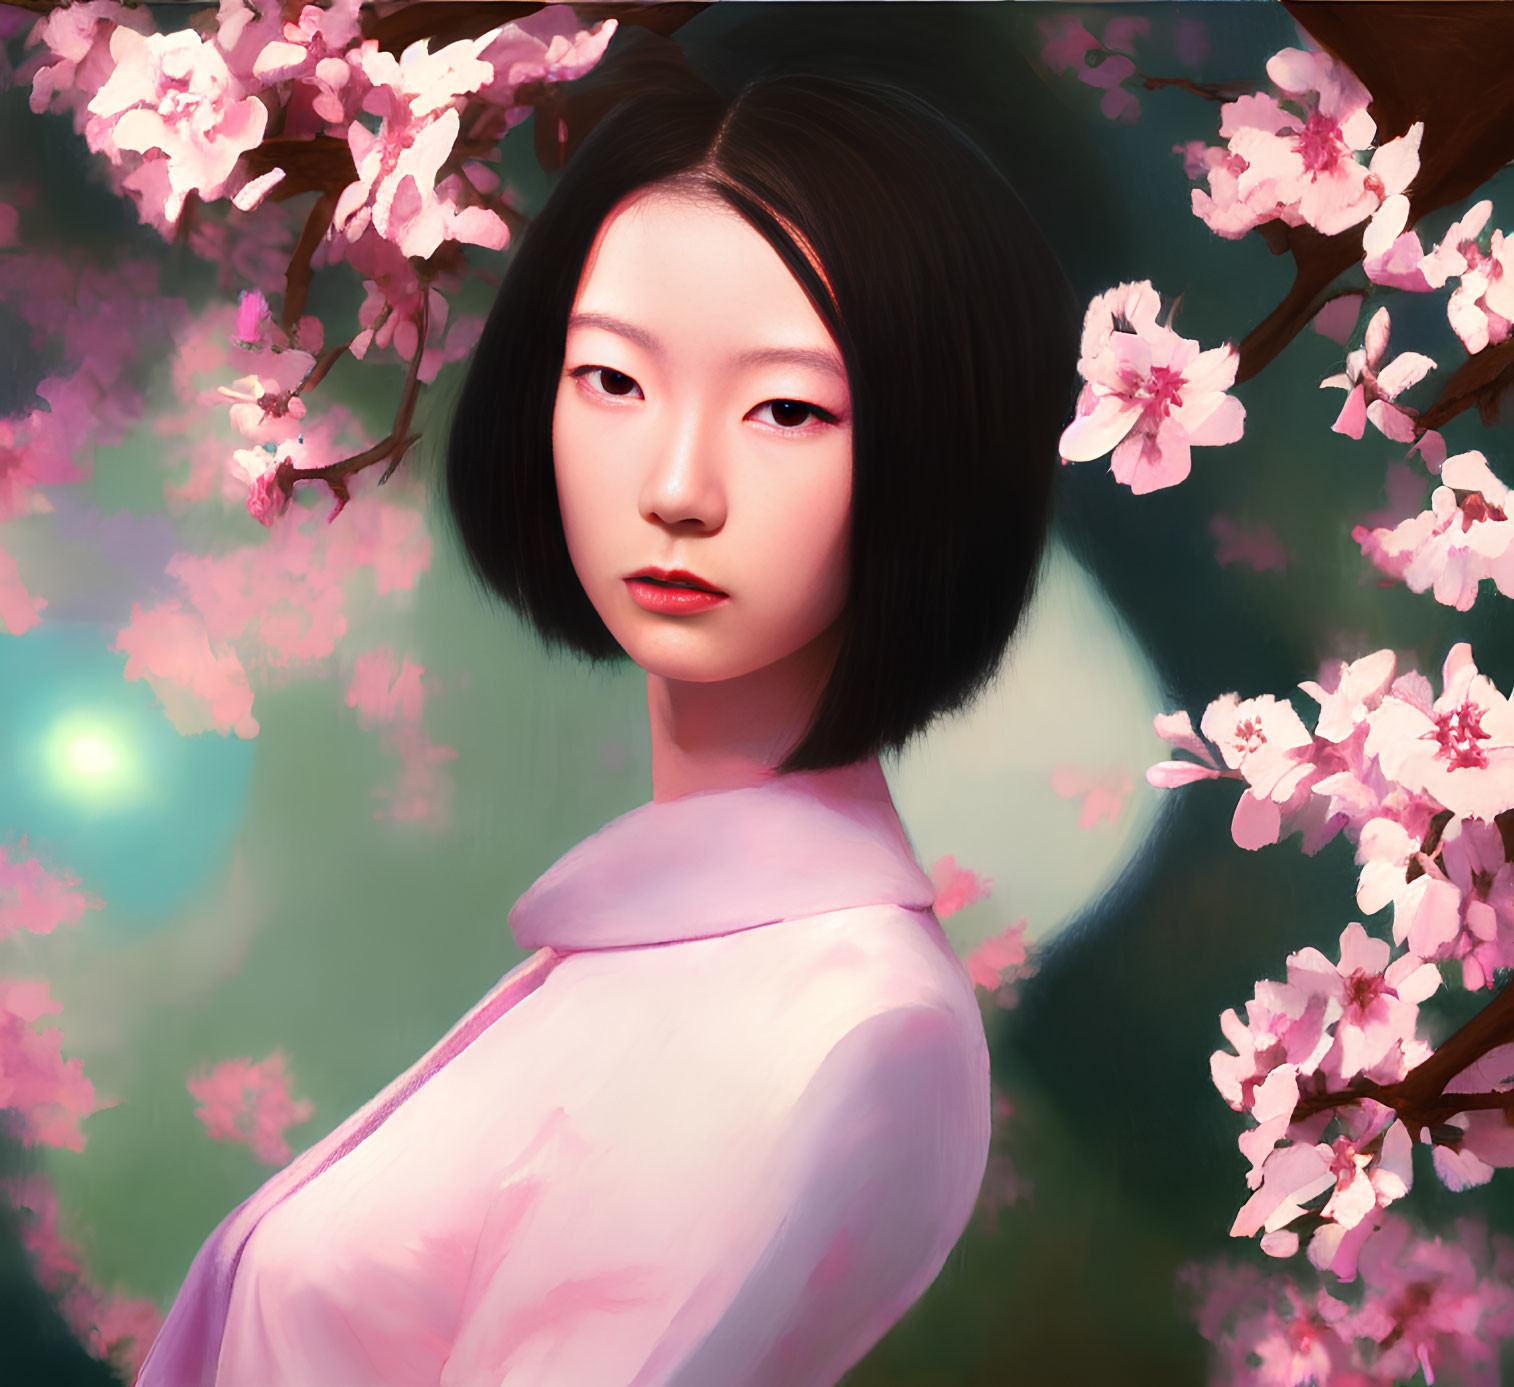 Young woman portrait with serene expression among pink cherry blossoms